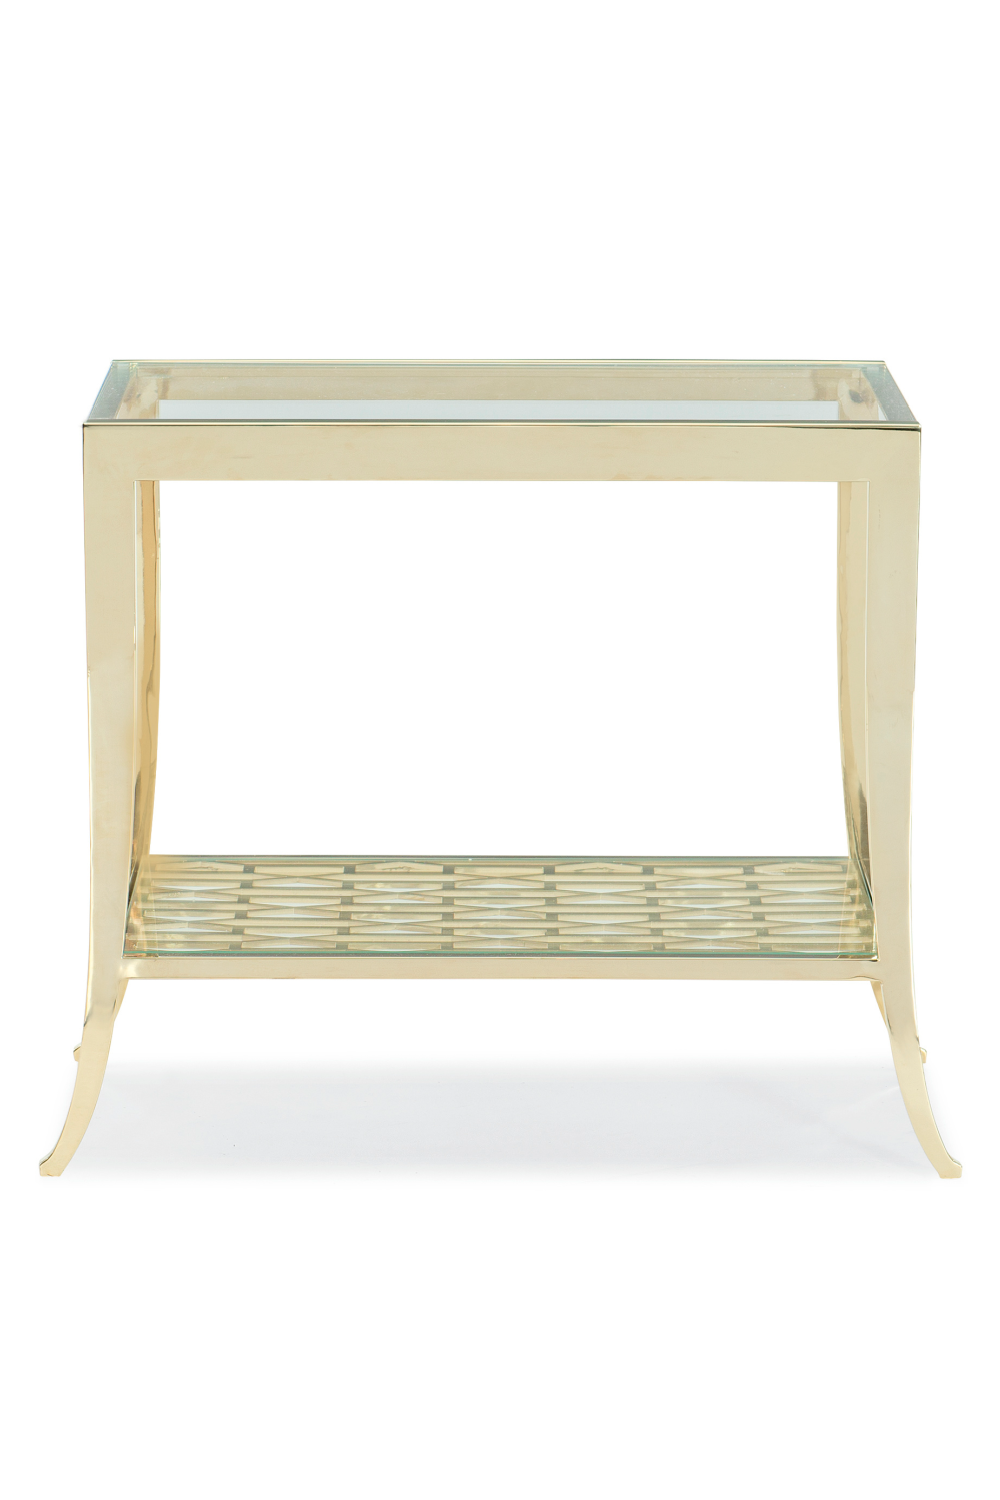 Gold Framed Side Table | Caracole A Precise Pattern | Oroa.com